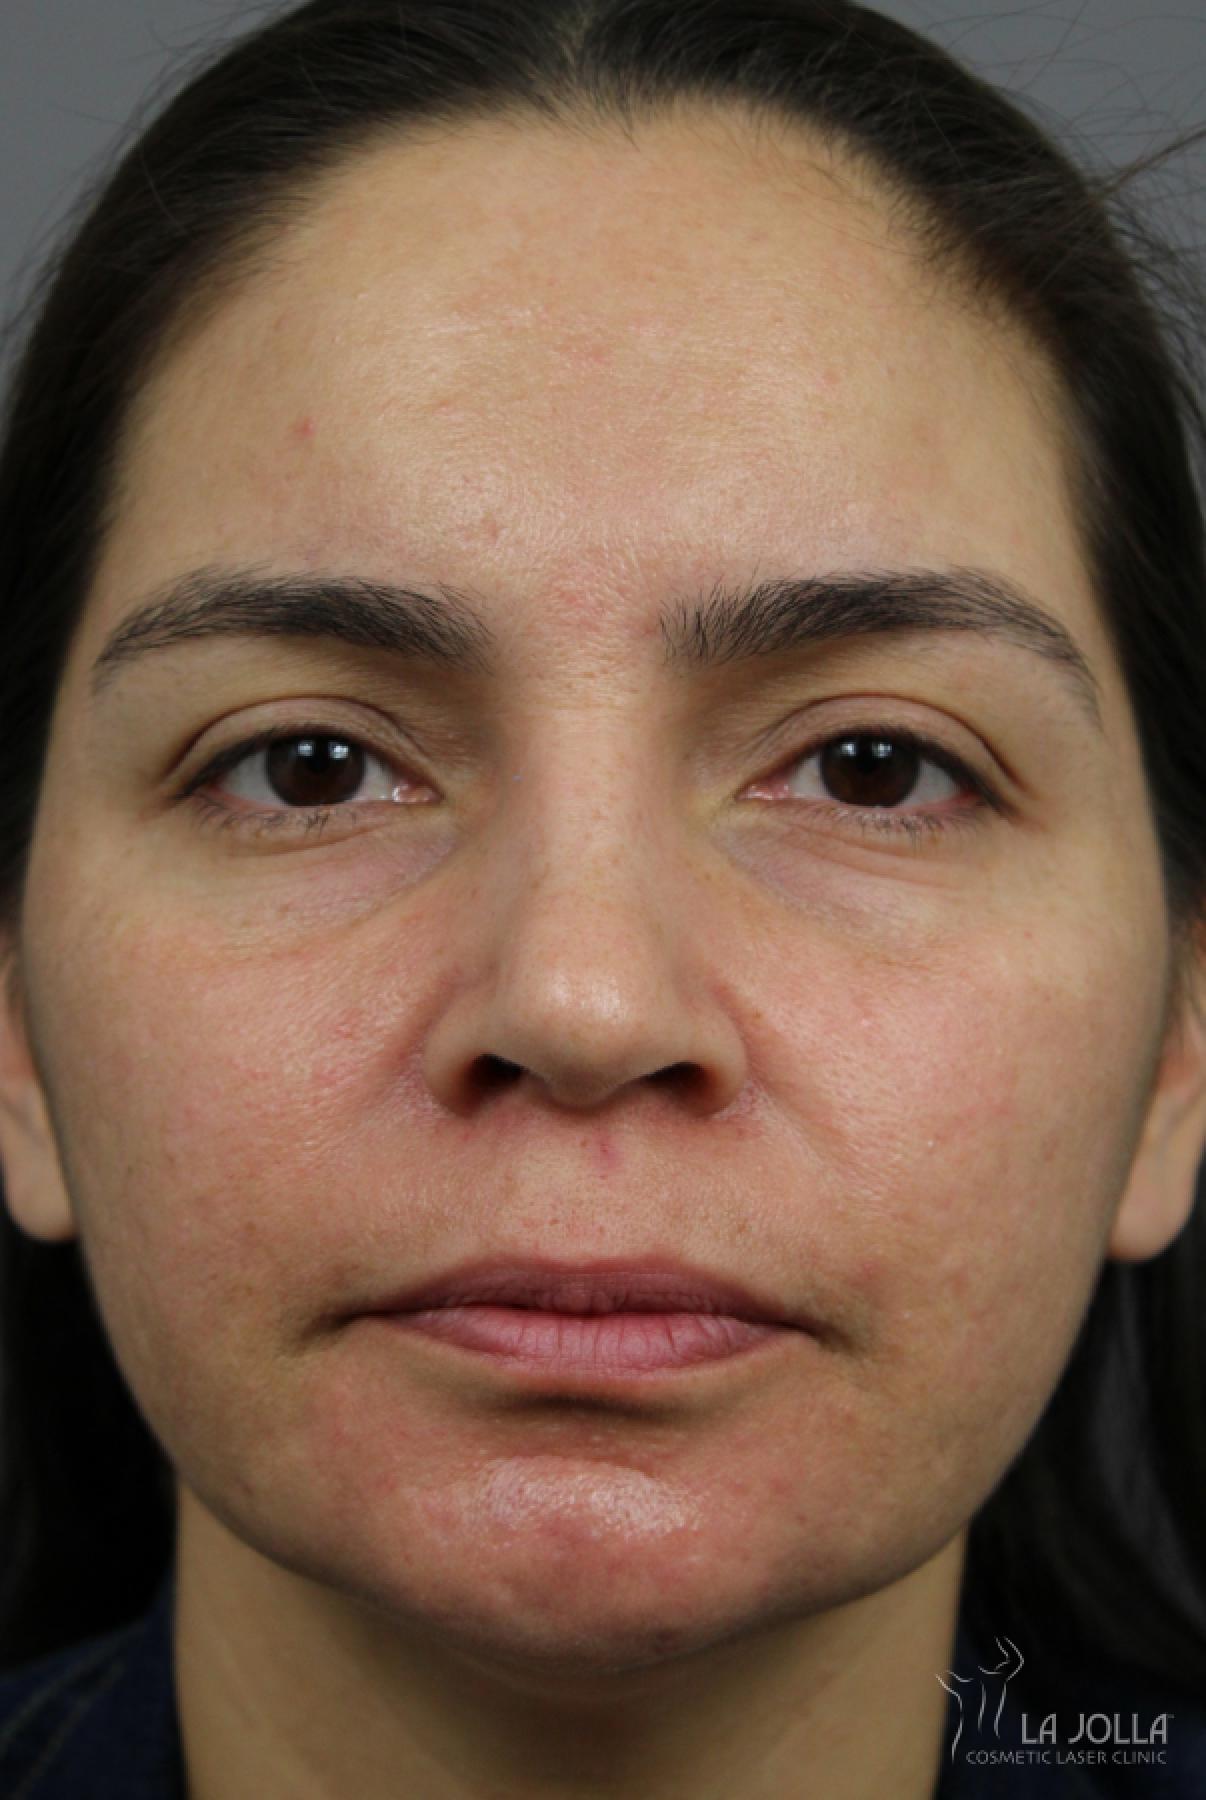 Acne Scars: Patient 3 - After 2